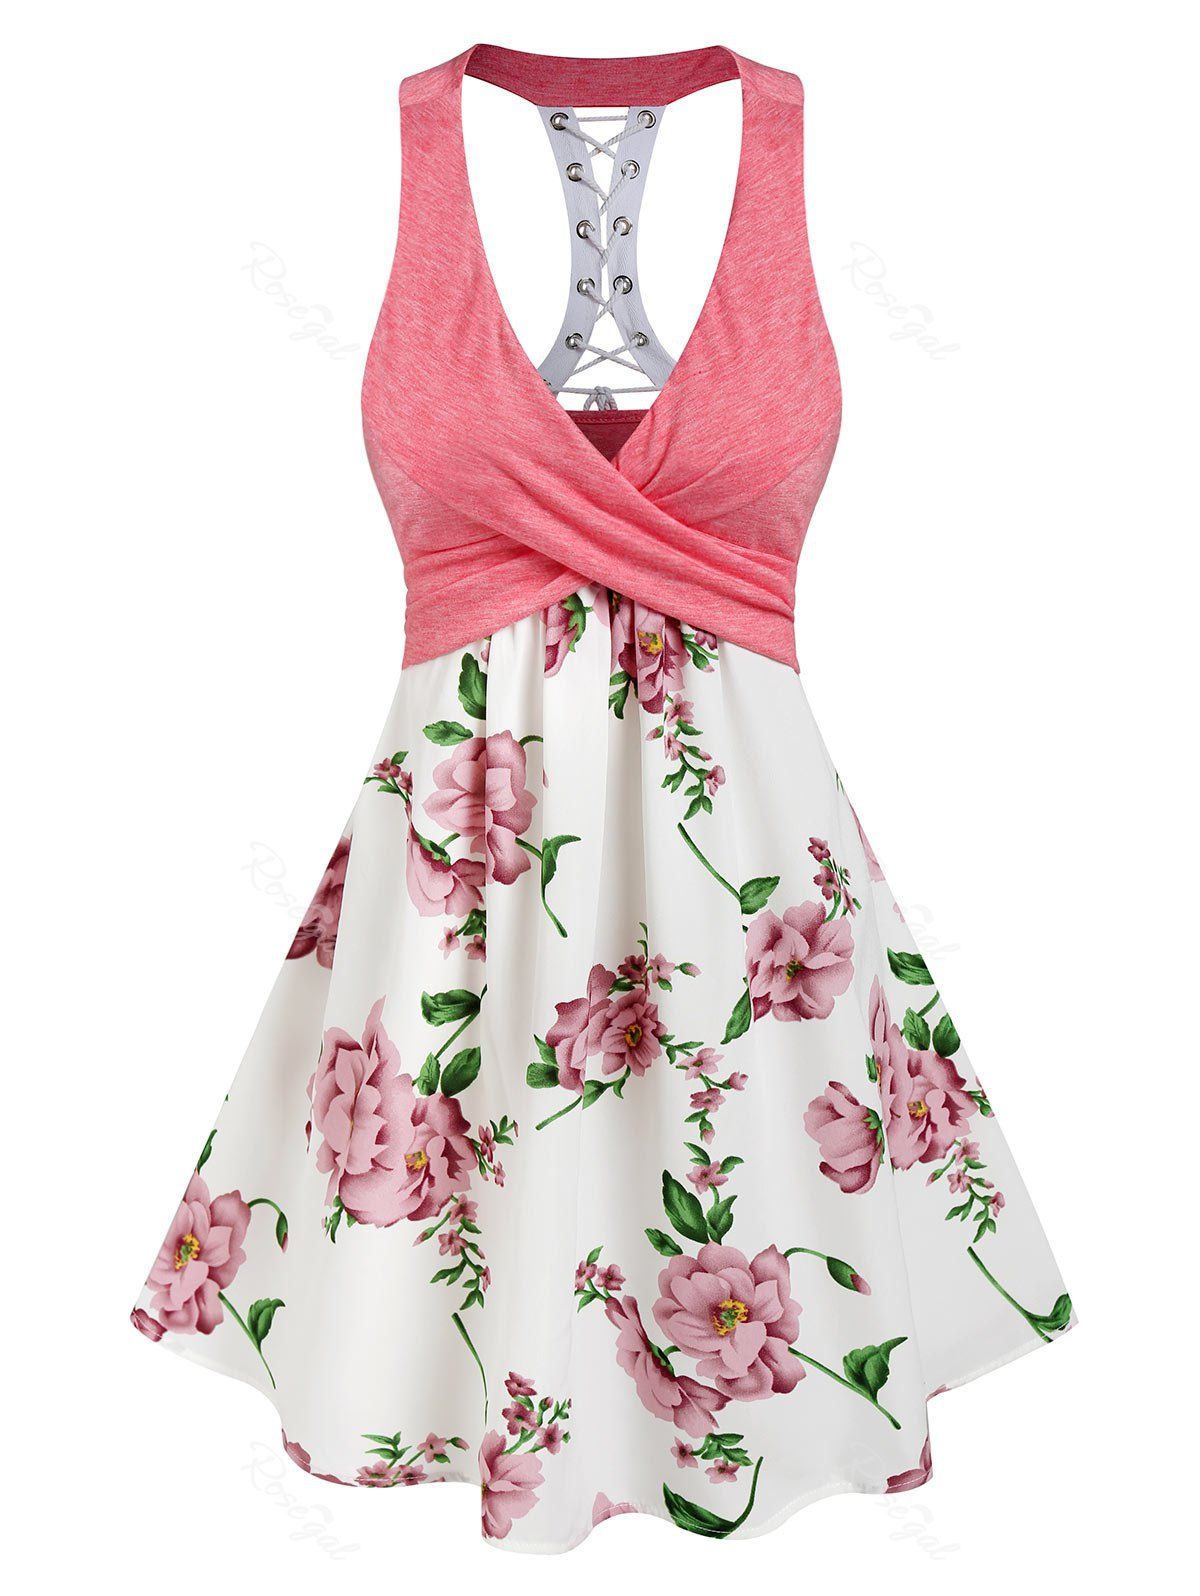 Outfit Sleeveless Flower Print Lace-up Crossover Dress  